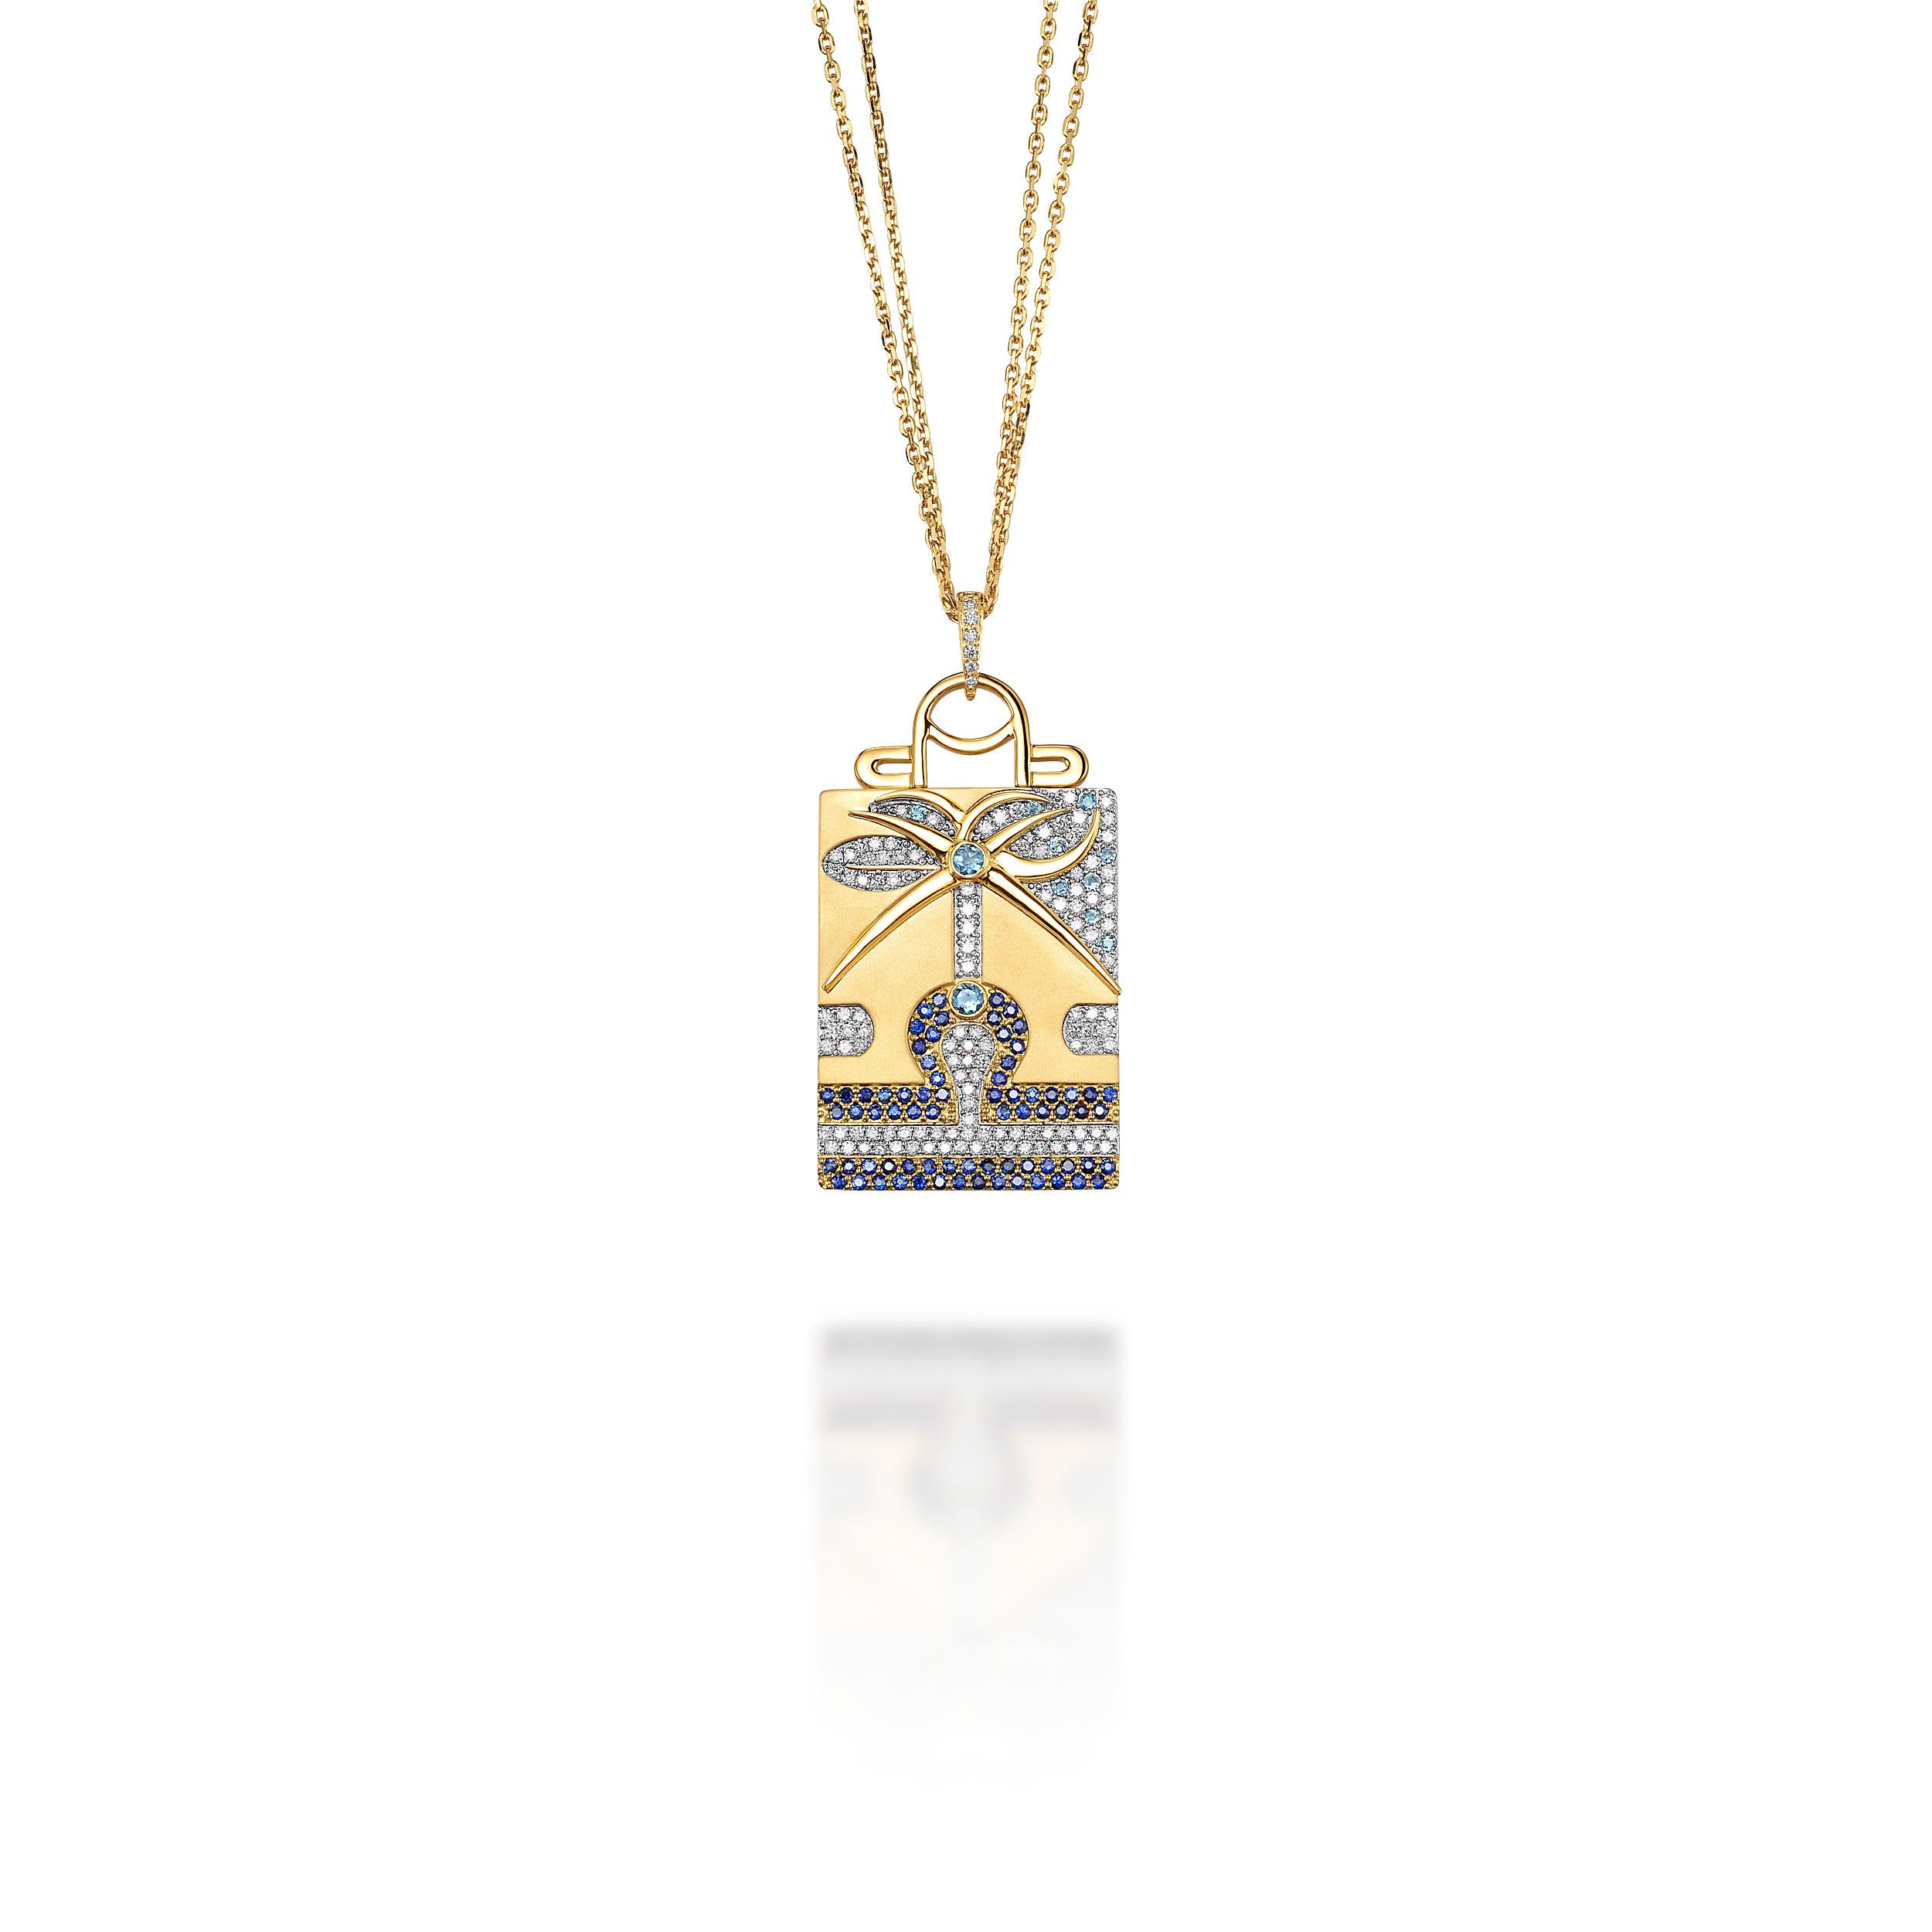 Libra Pendant - eminently concerned to coexist in peace and harmony with individual liberty of thought. Symbolized by the beauty and symmetry of „The Persian Garden“ that implies perfect cosmic order, divine balance.
Enhance your mental discipline